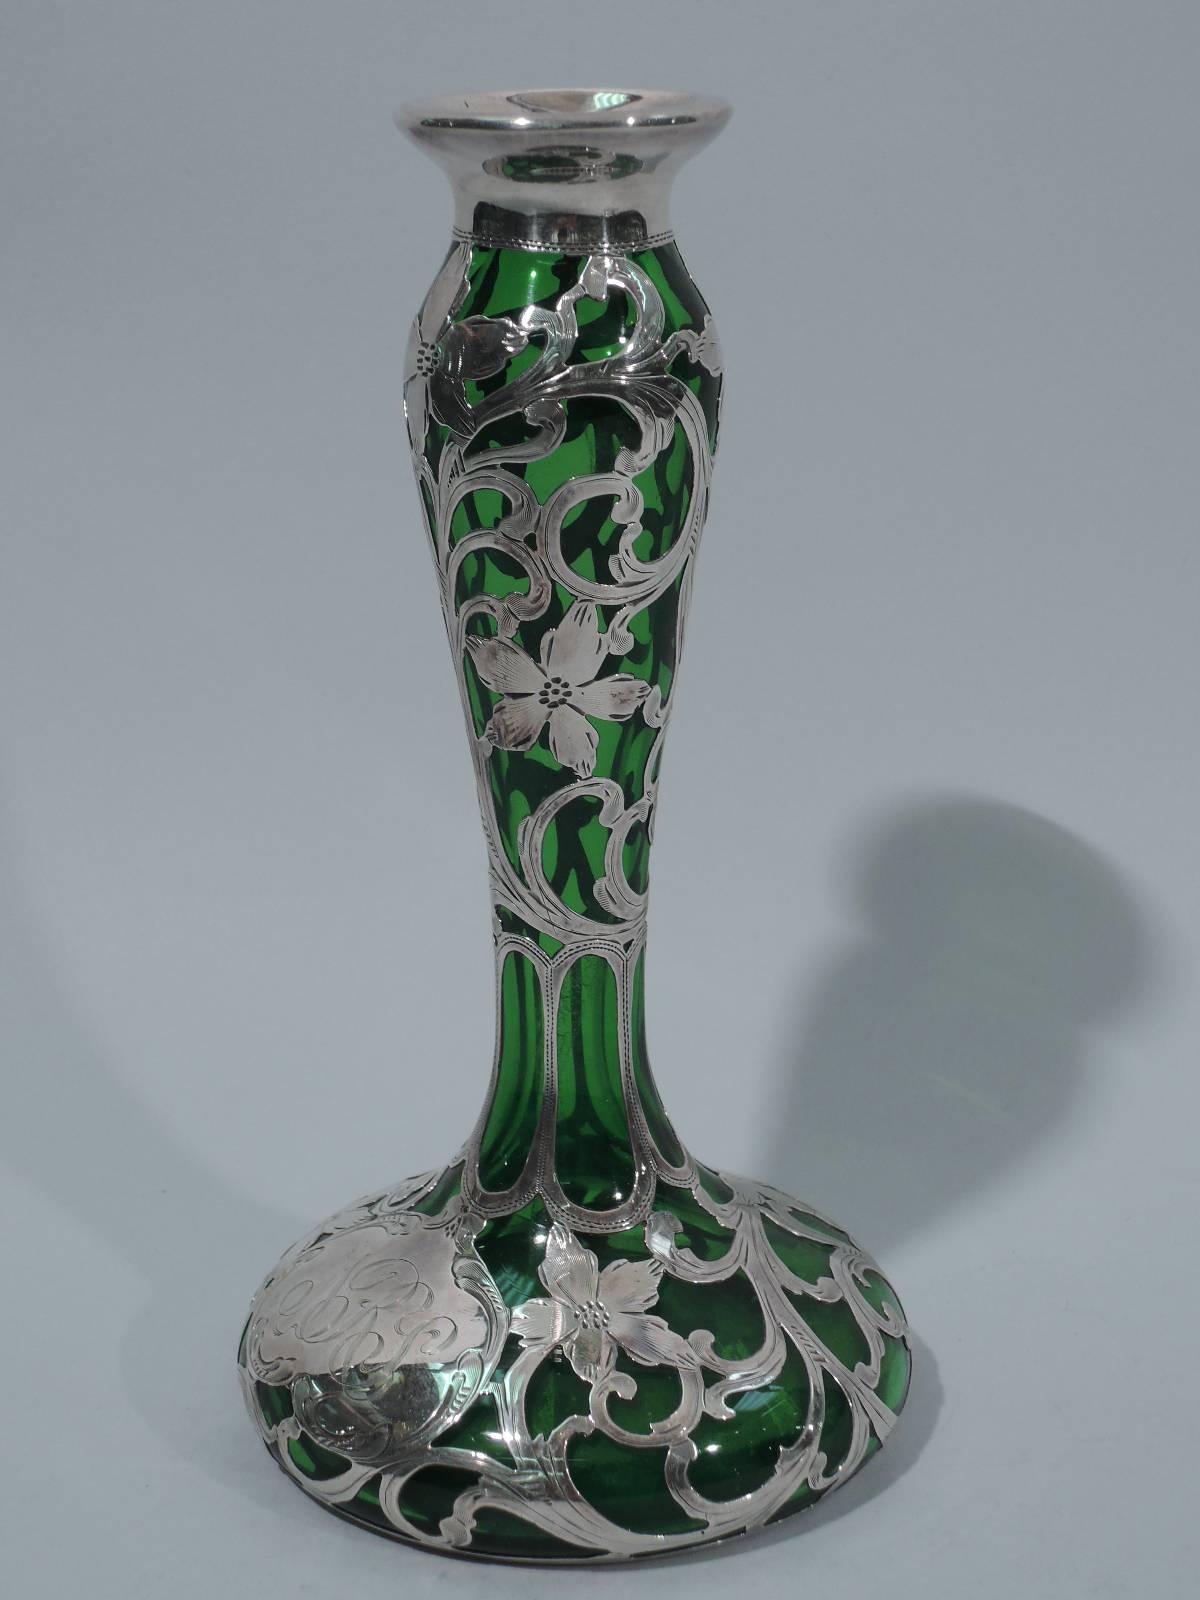 Art Nouveau emerald glass vase with silver overlay. Made by Alvin in Providence, circa 1900. Baluster on raised and round foot. Olive-ish glass overlaid with pretty silver flowers and scrolls. Scrolled cartouche has engraved script monogram. Flared